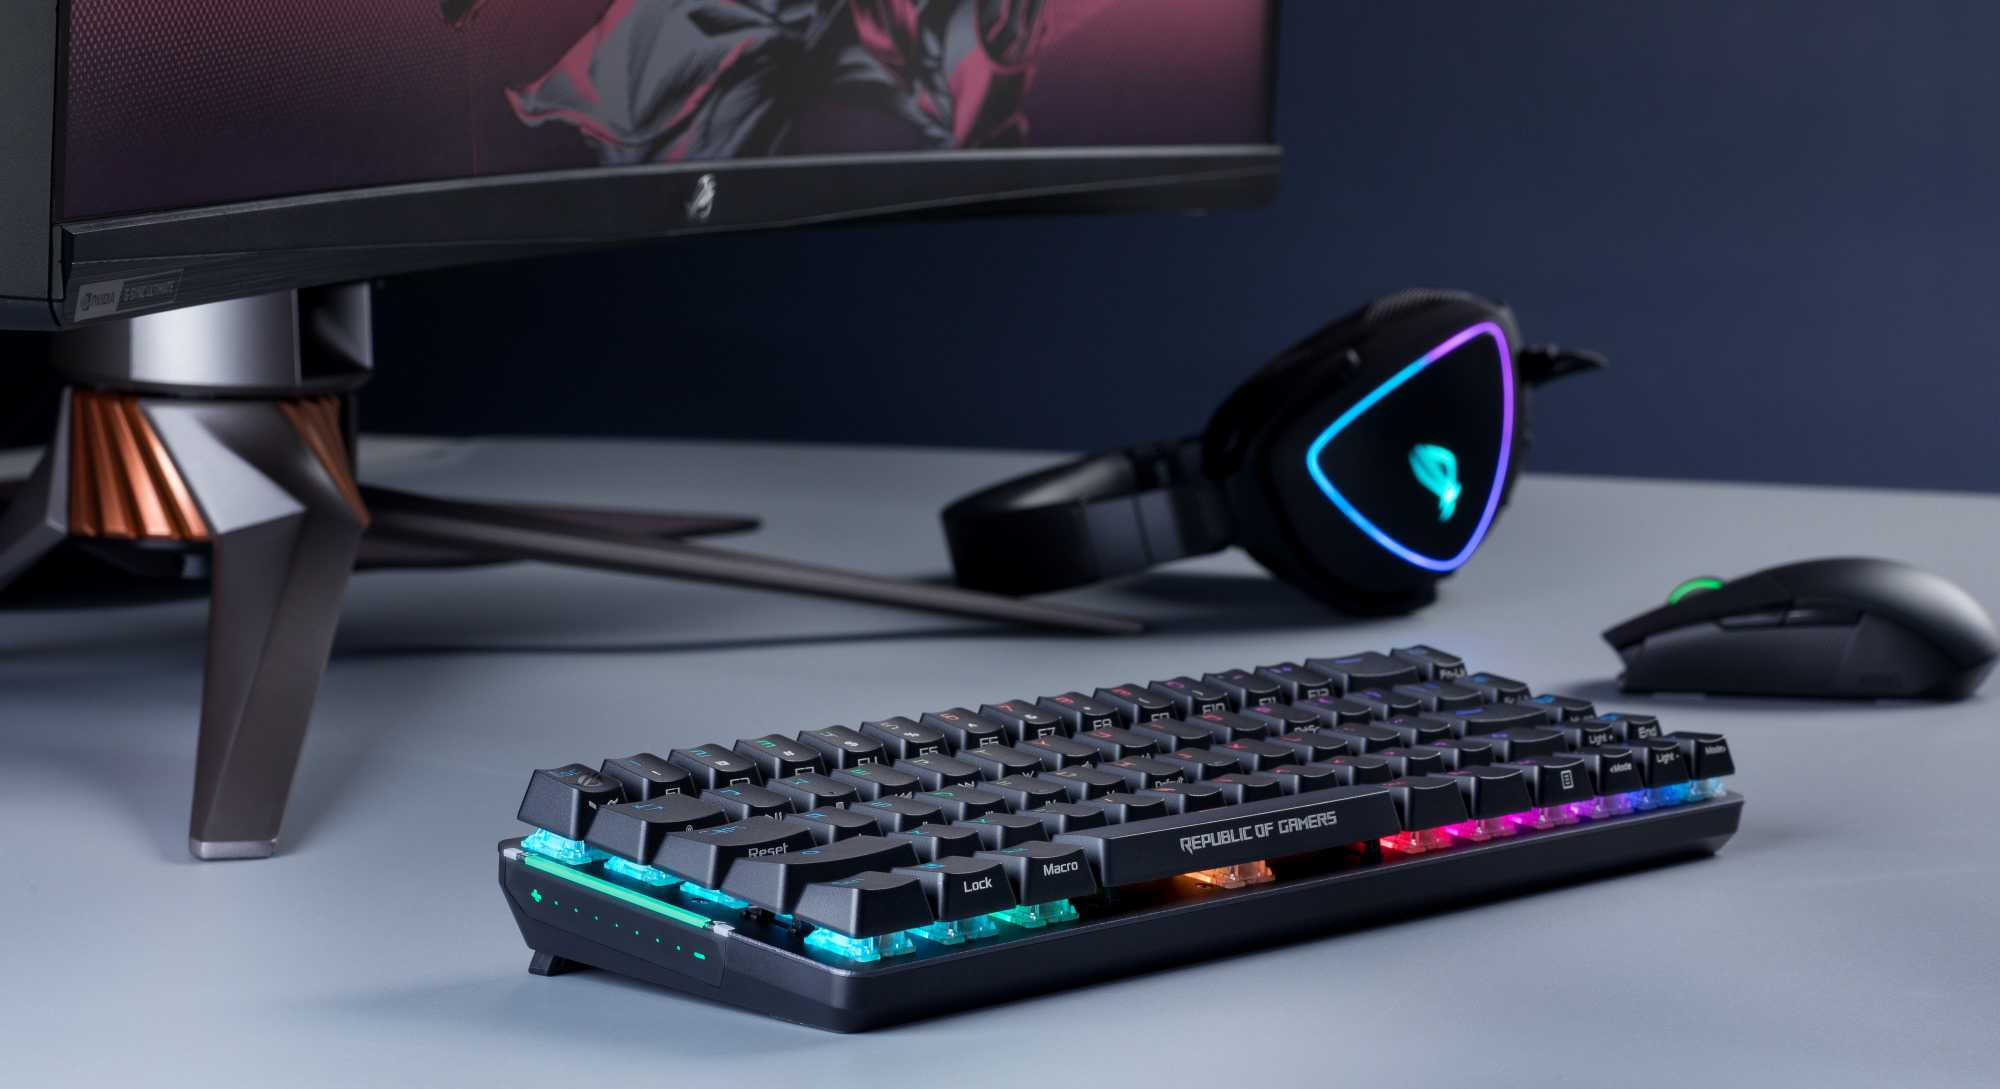 Hands-on: The ROG Falchion gaming keyboard is compact without compromise